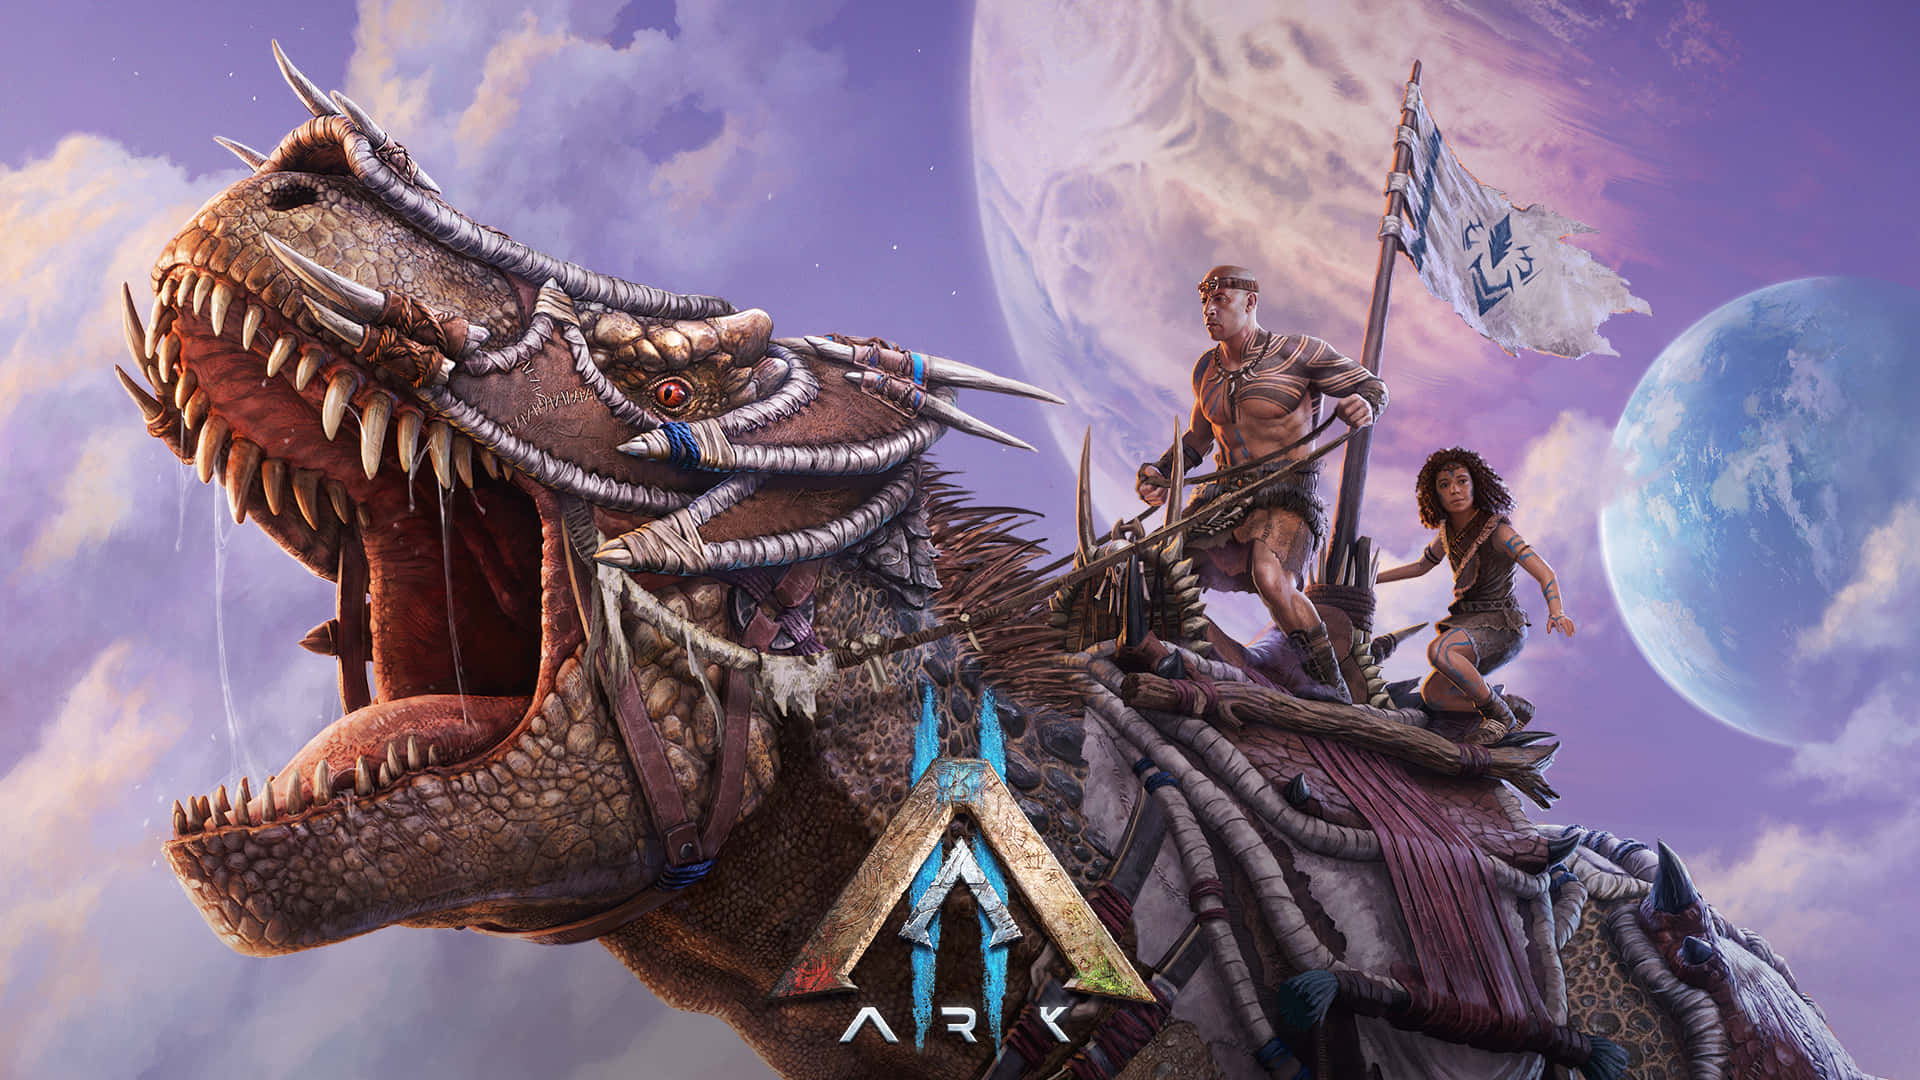 Ark Iii - A Dinosaur And Two People Riding On It